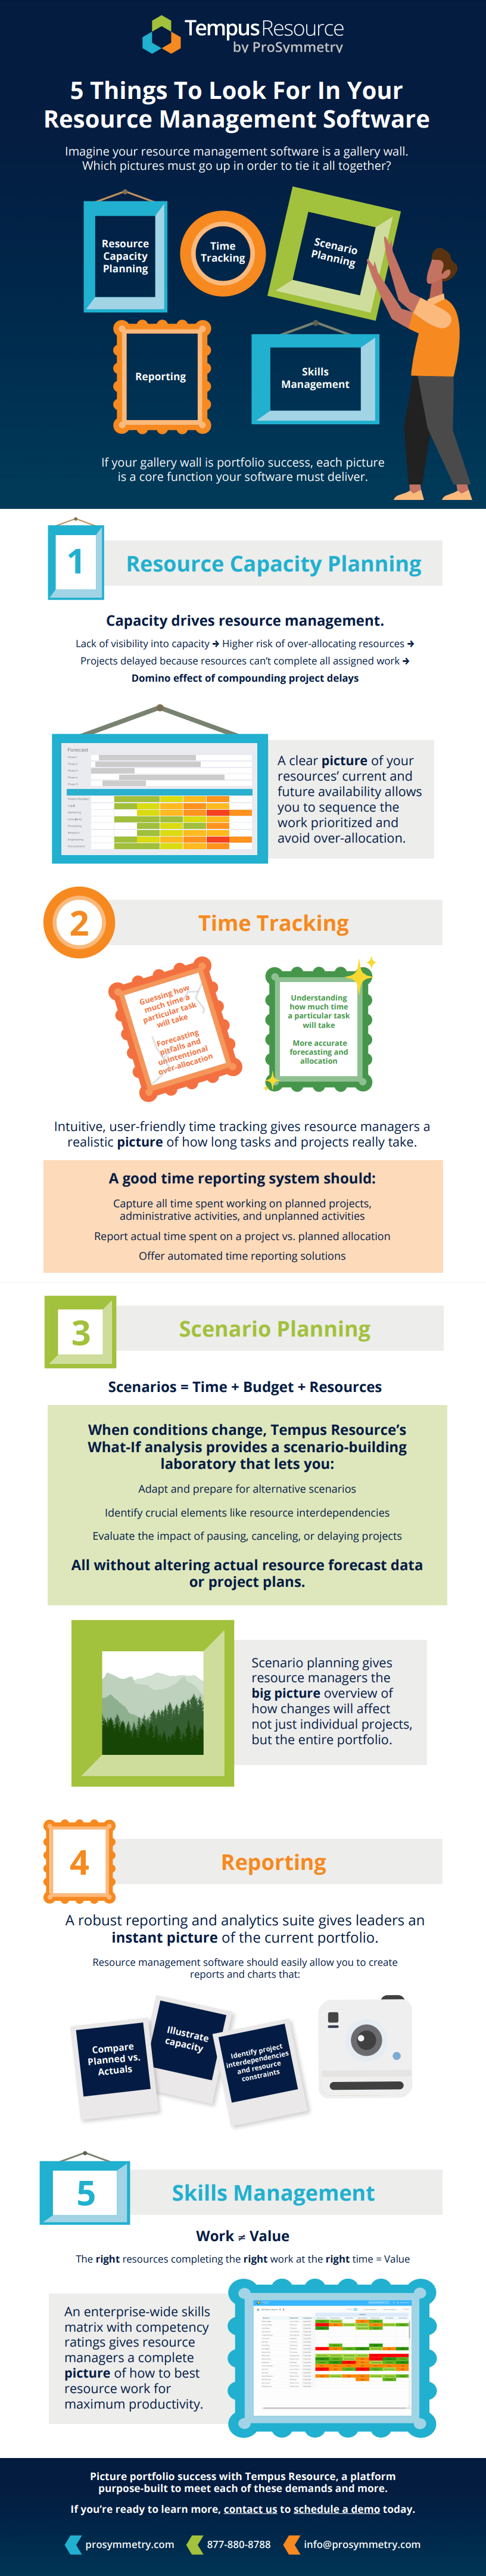 Infographic: 5 things to look for in RM software